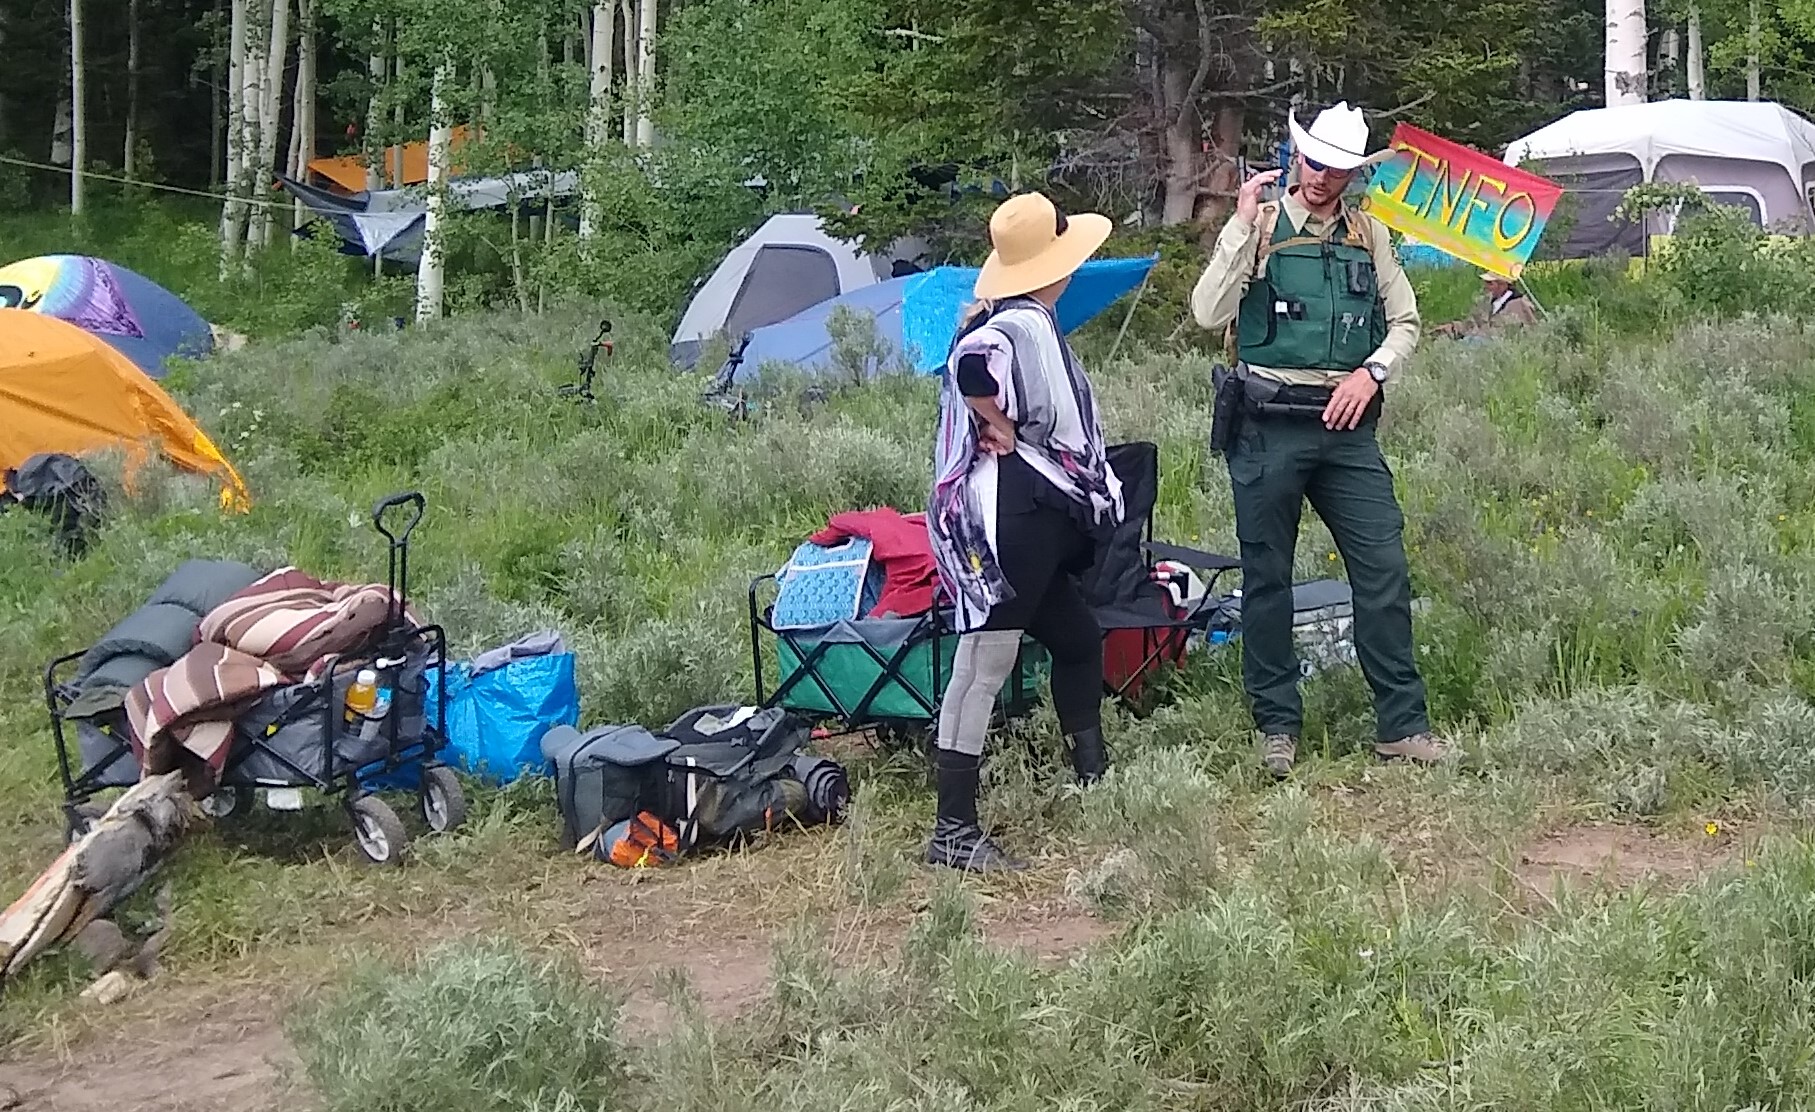 A Forest Service Law Enforcement Office talking to a member of the Rainbow Gathering.